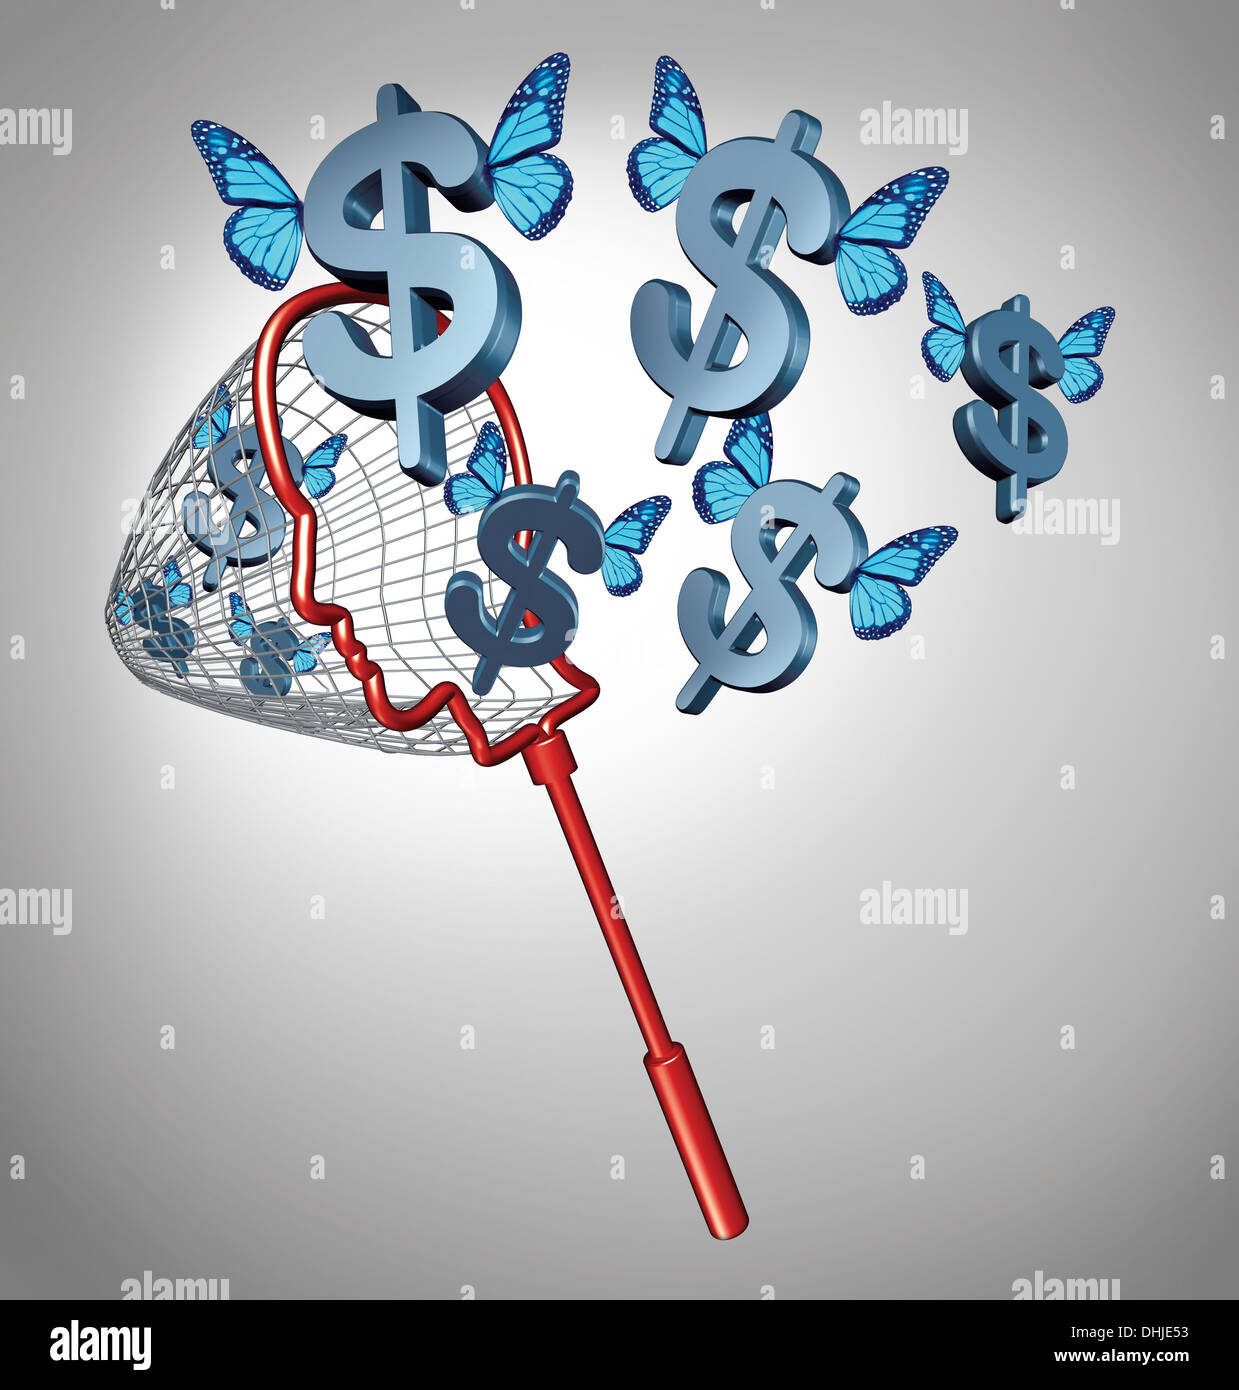 Earn money concept and smart investing financial symbol as a business metaphor with a net shaped as a human head catching flying dollar signs with blue butterfly wings as an icon of building wealth. Stock Photo